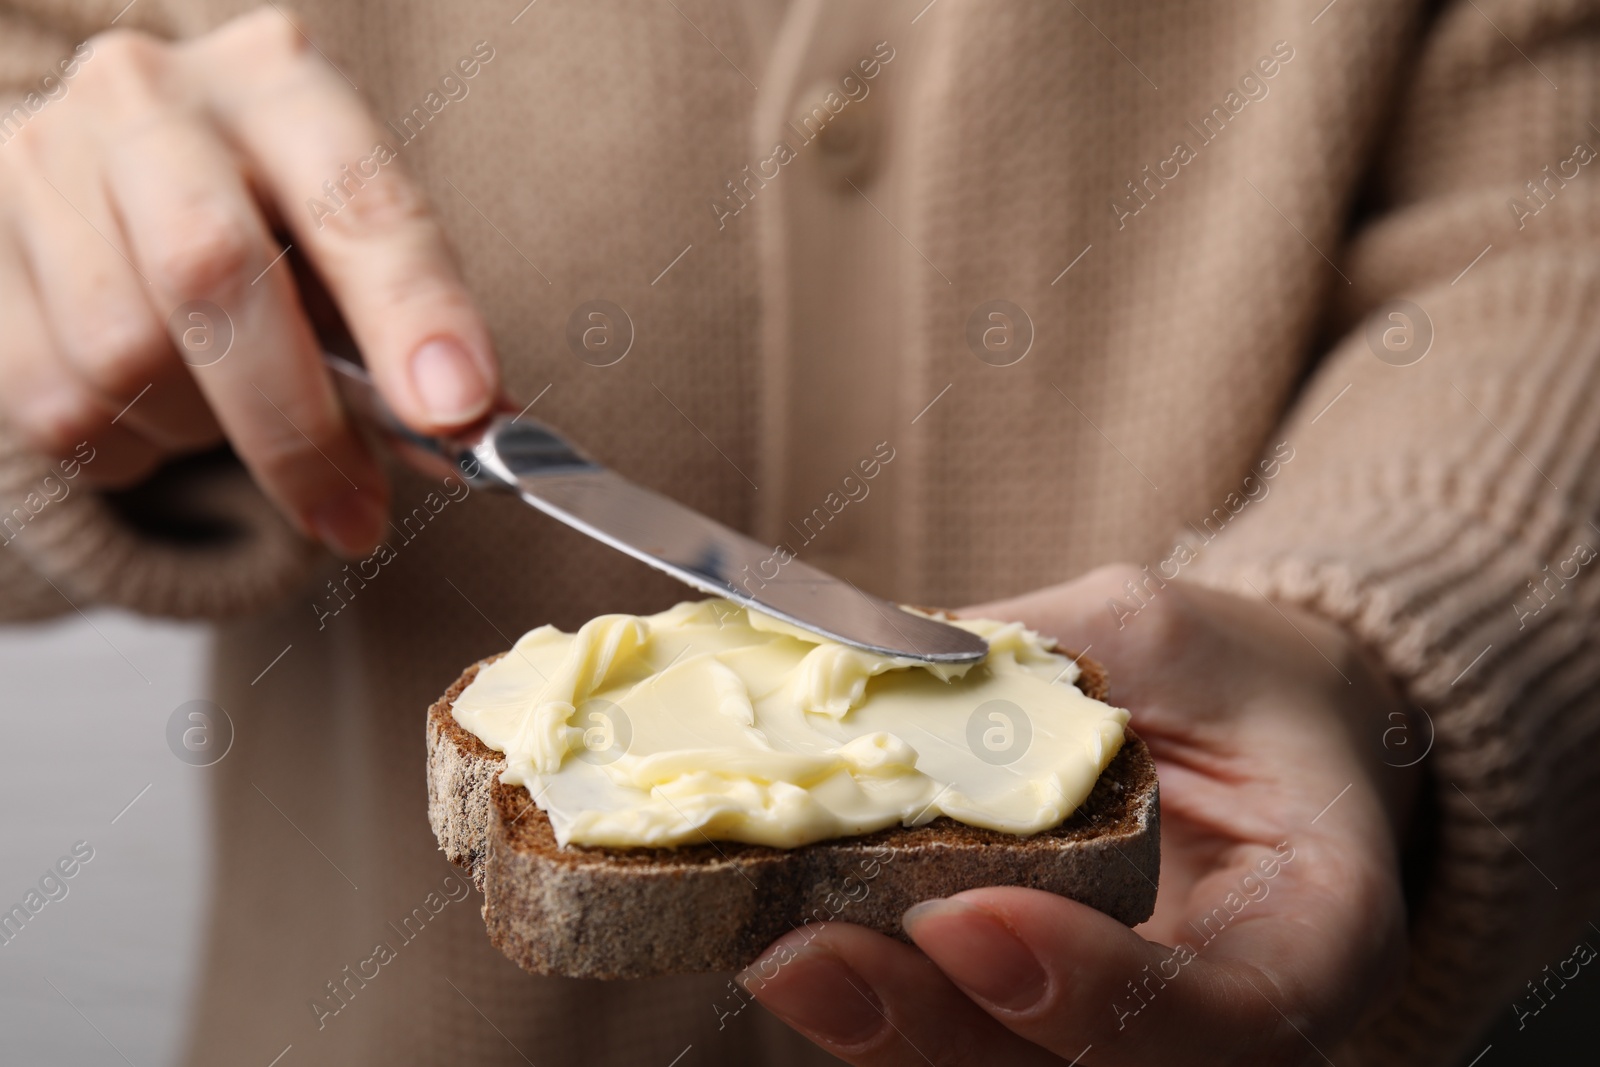 Photo of Woman spreading butter onto bread, closeup view